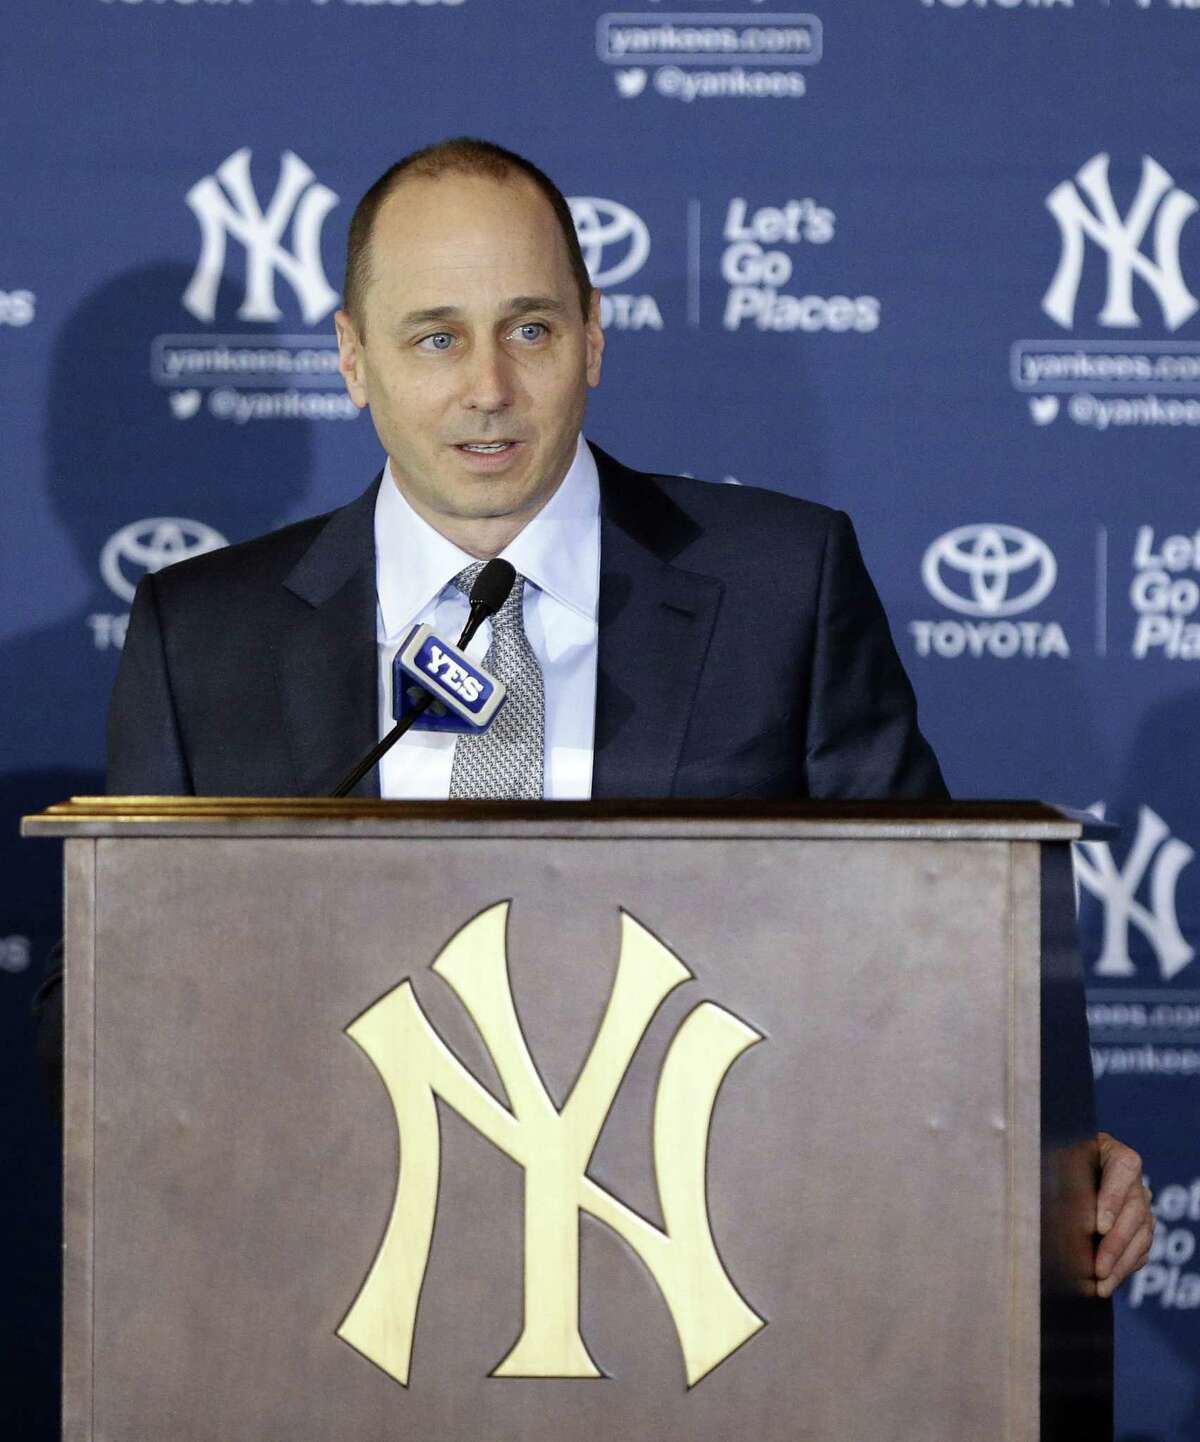 The New York Yankees announced Friday they have re-signed general manager Brian Cashman to a three-year contract.